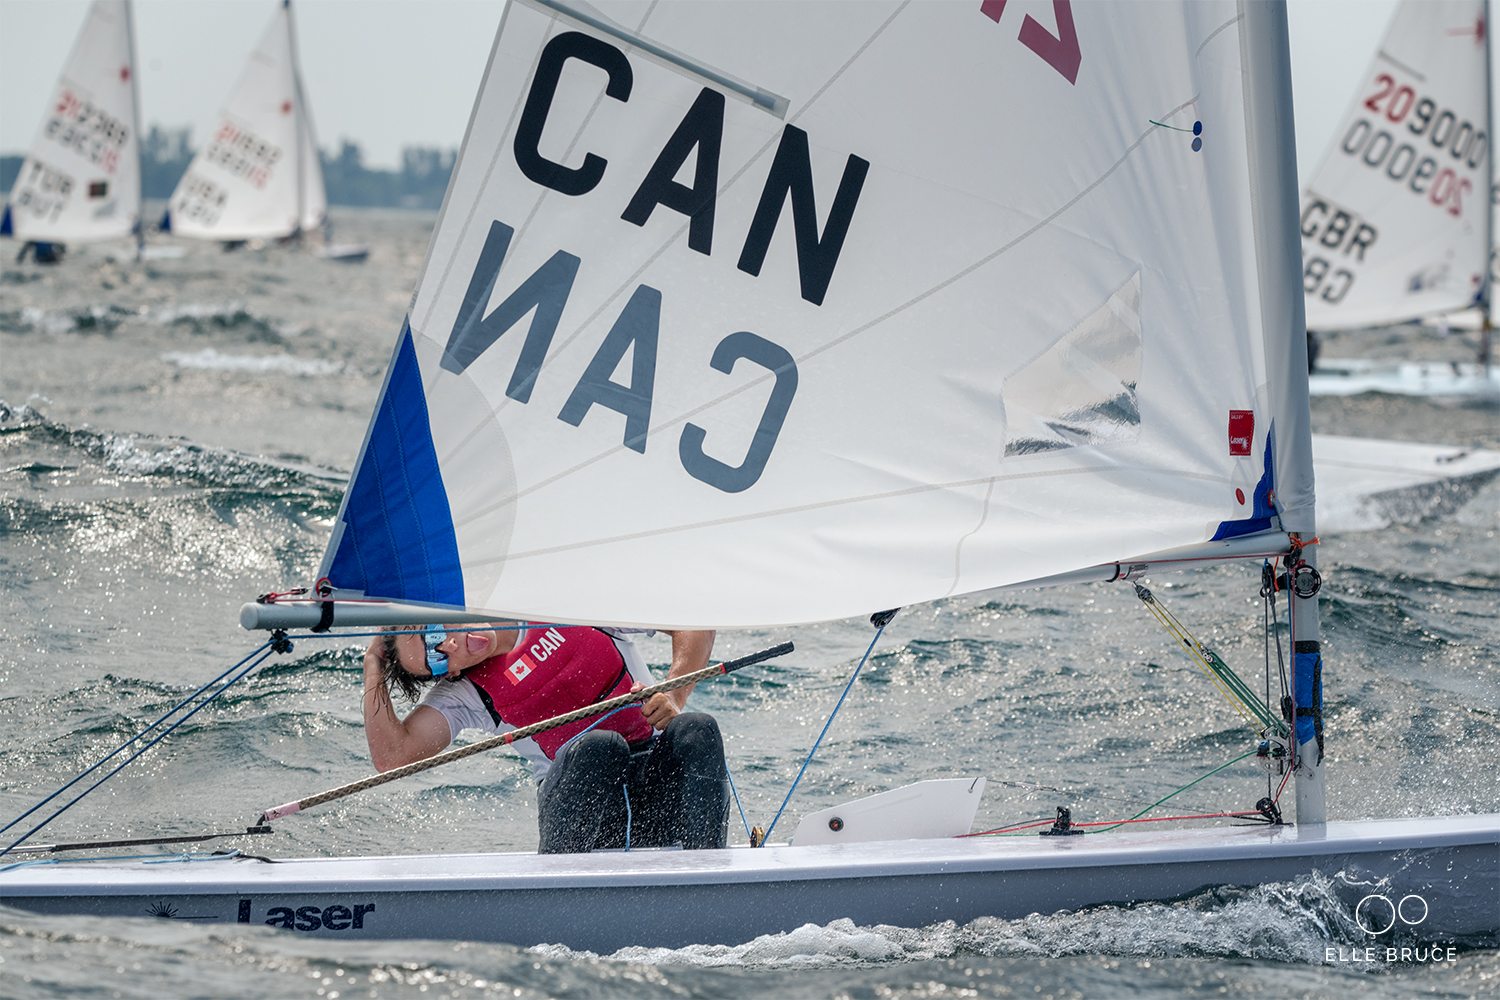 2019 ILCA Laser Radial Youth Worlds Championship — MY SAIL TEAM